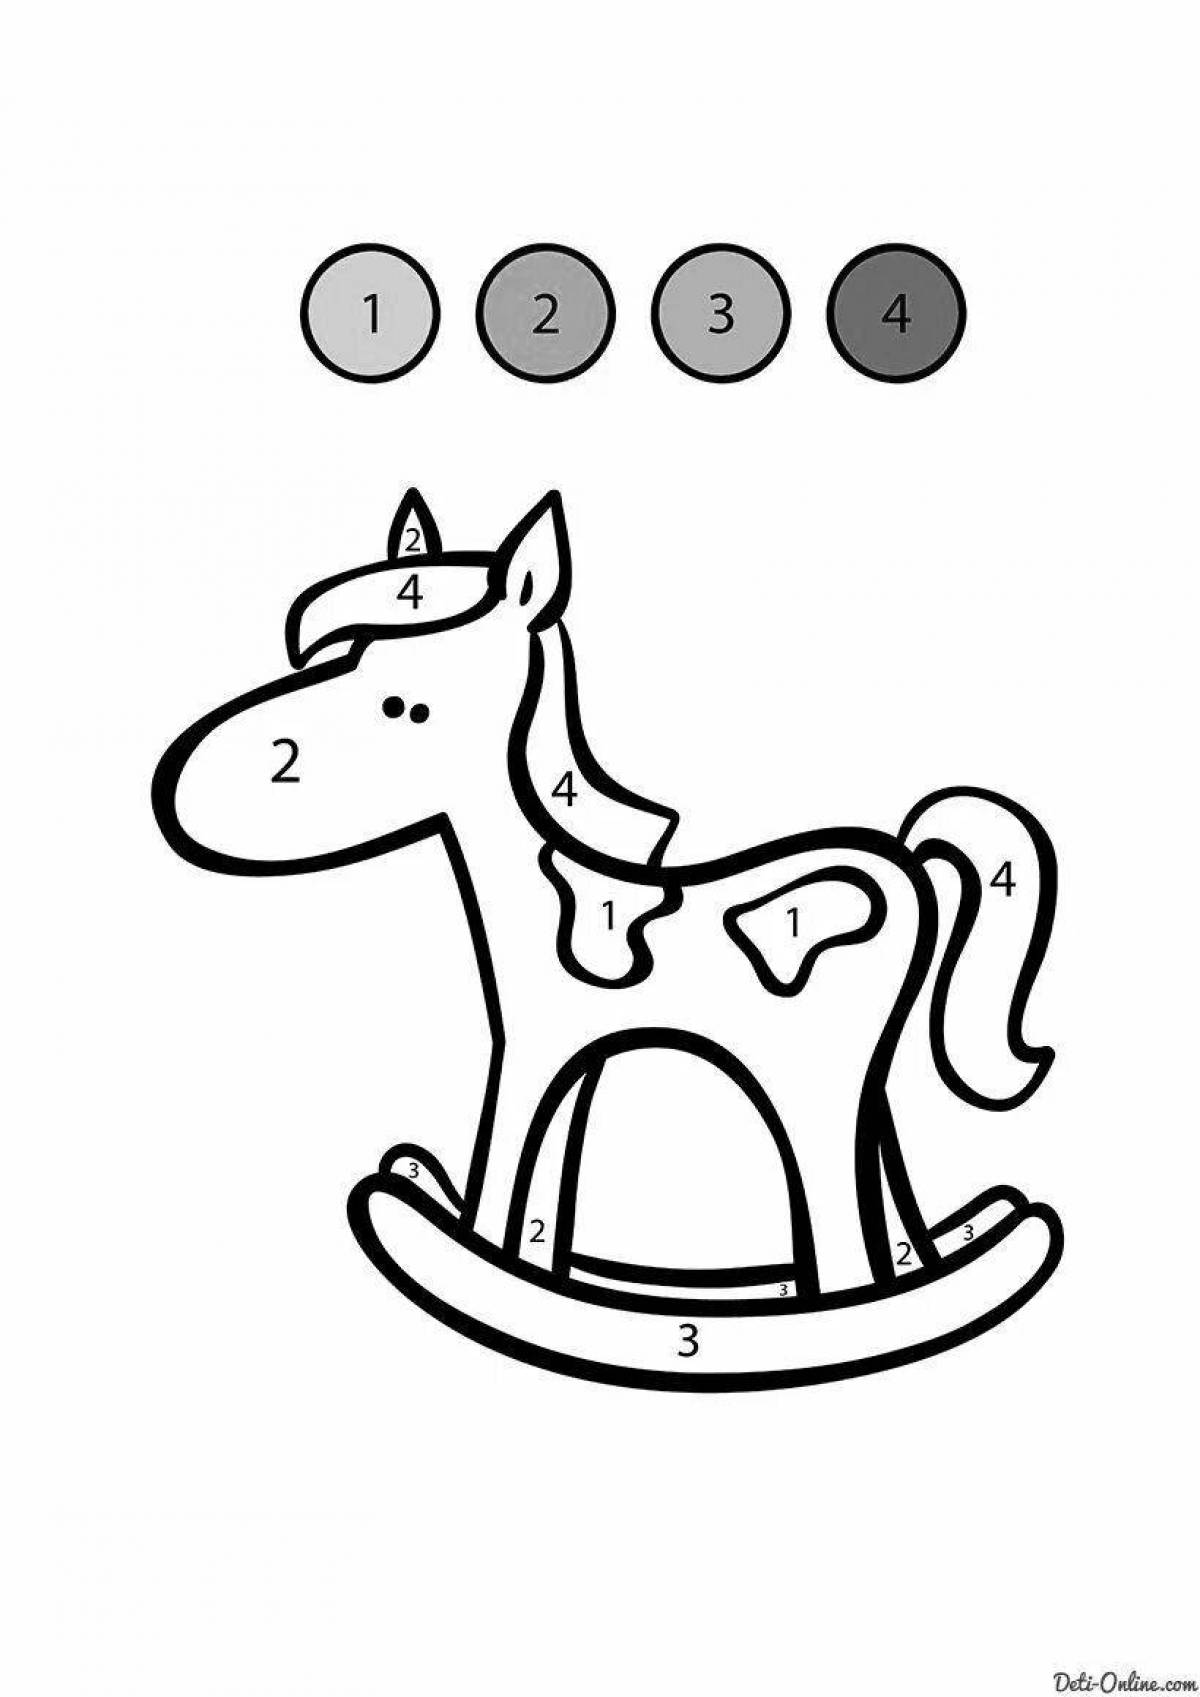 Joyful horse coloring by numbers